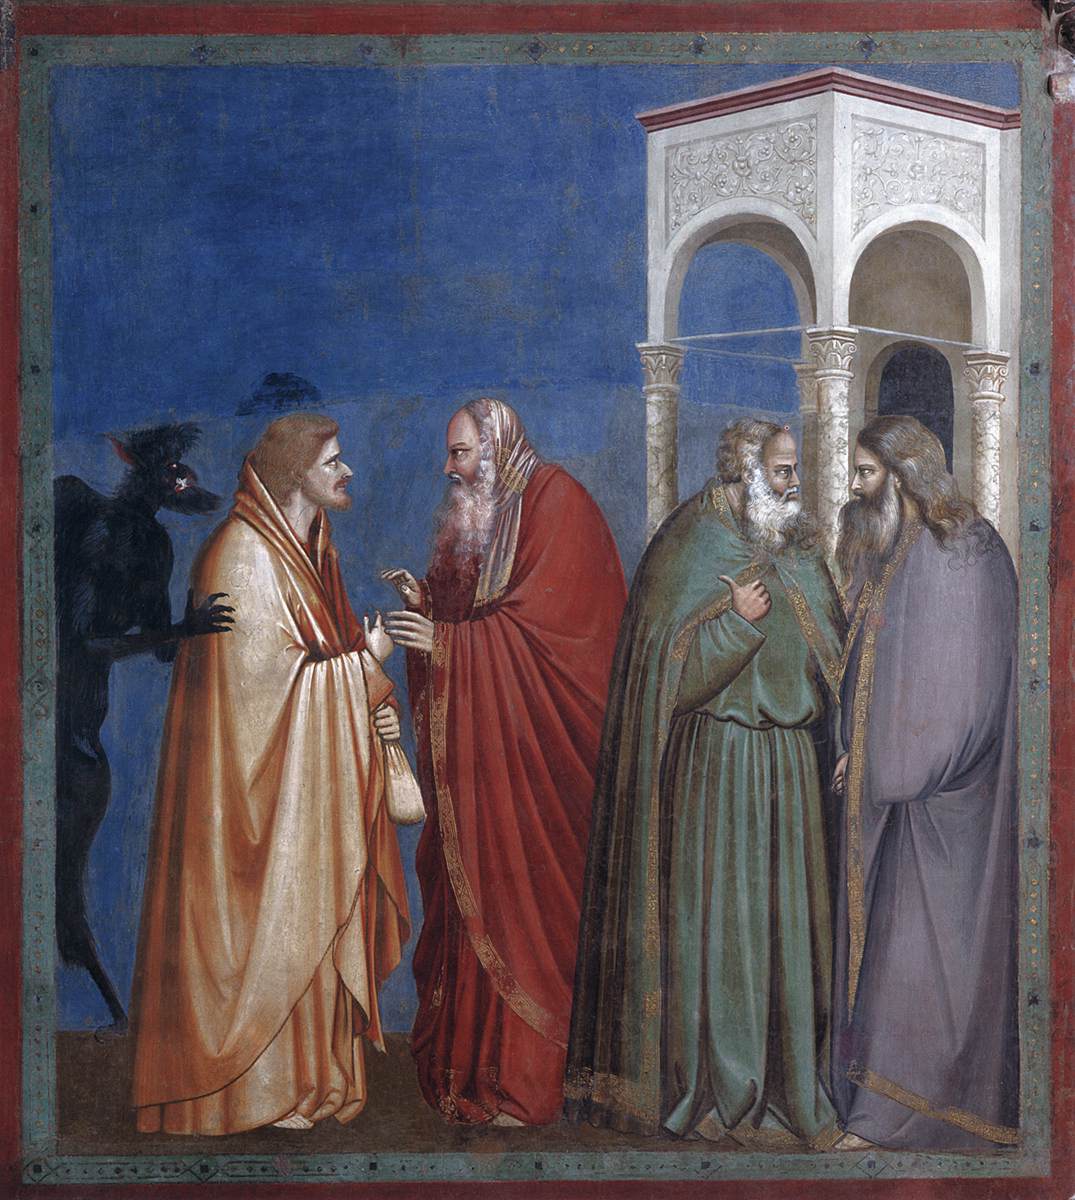 No 28 Scenes from the Life of Christ: 12 Judas's betrayal